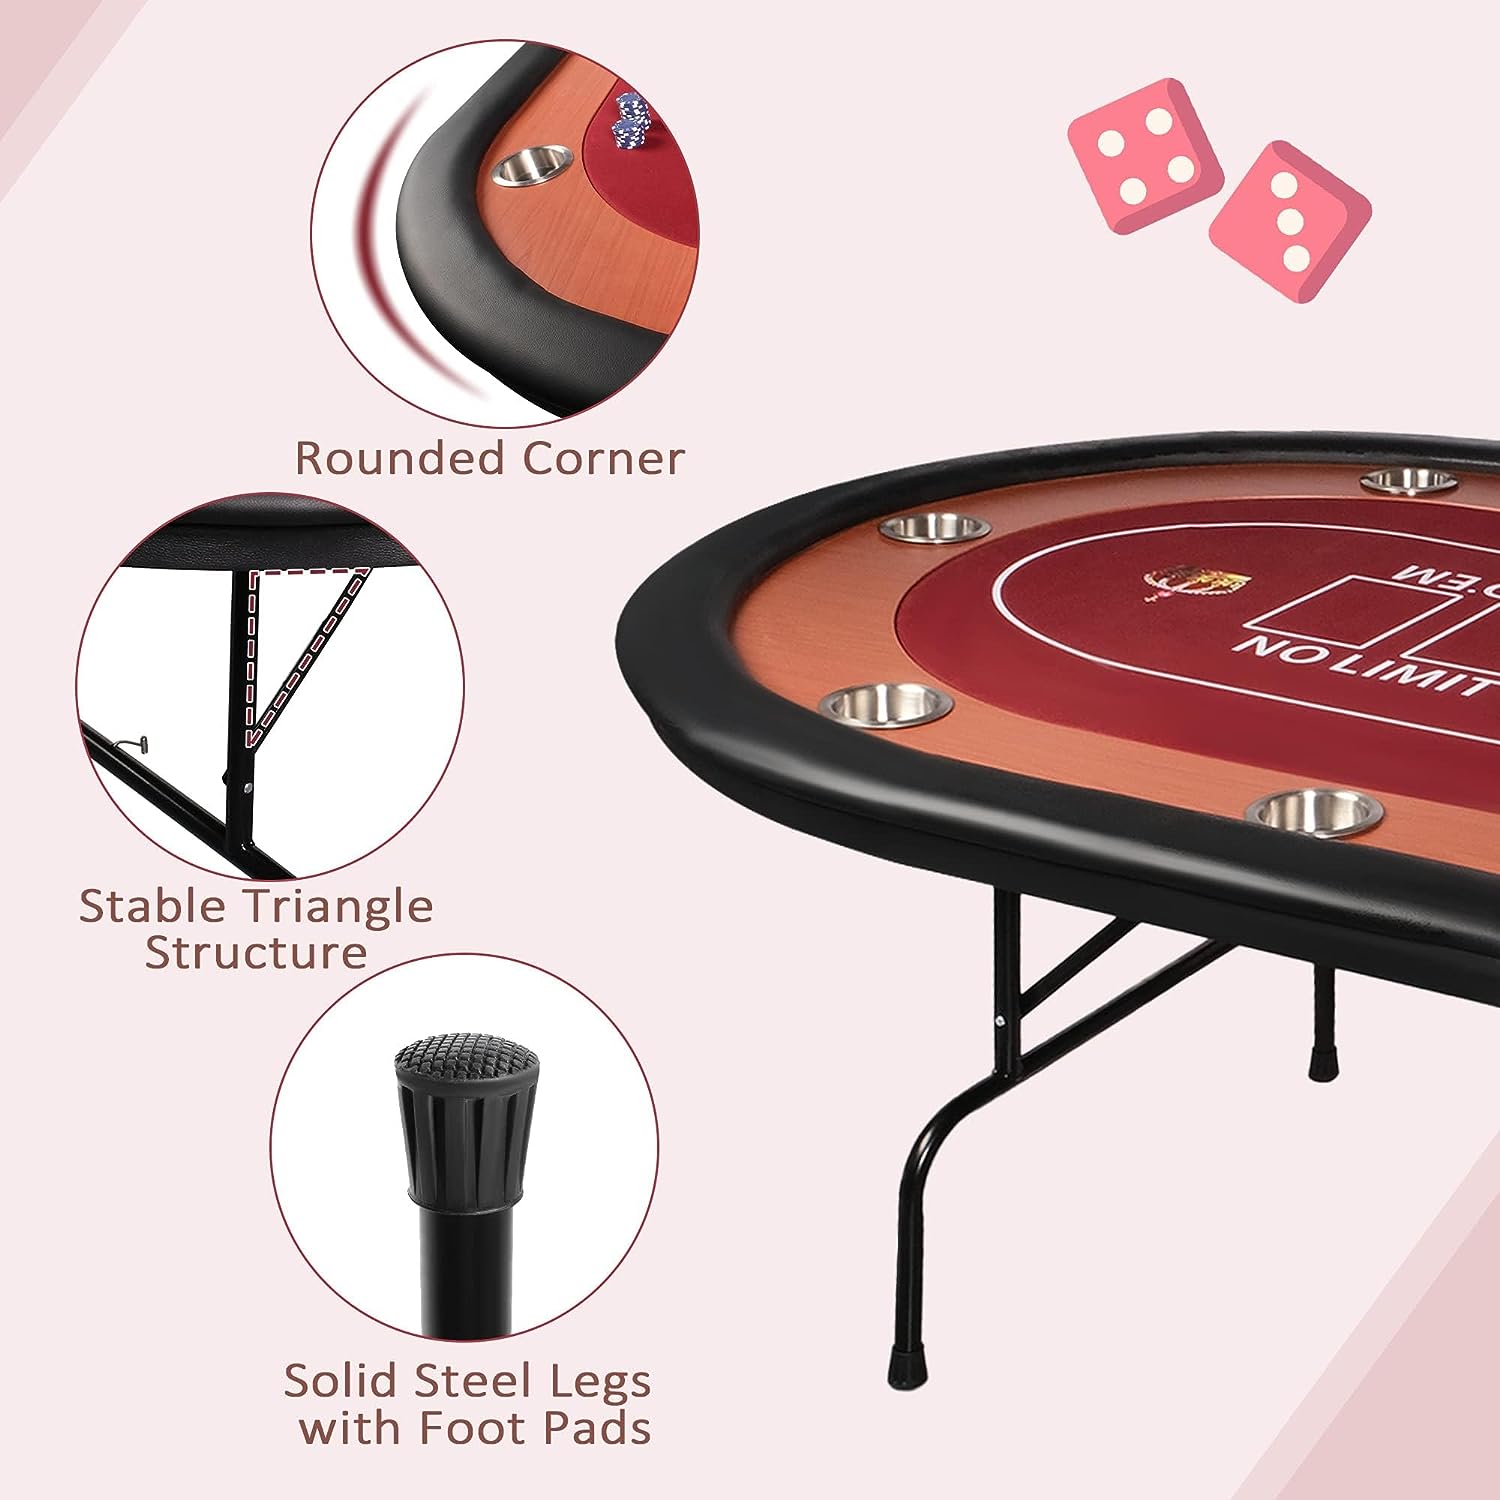 90.5" Large Folding Poker Table 10 Player Casino Texas Holdem Table for Card Game, Red